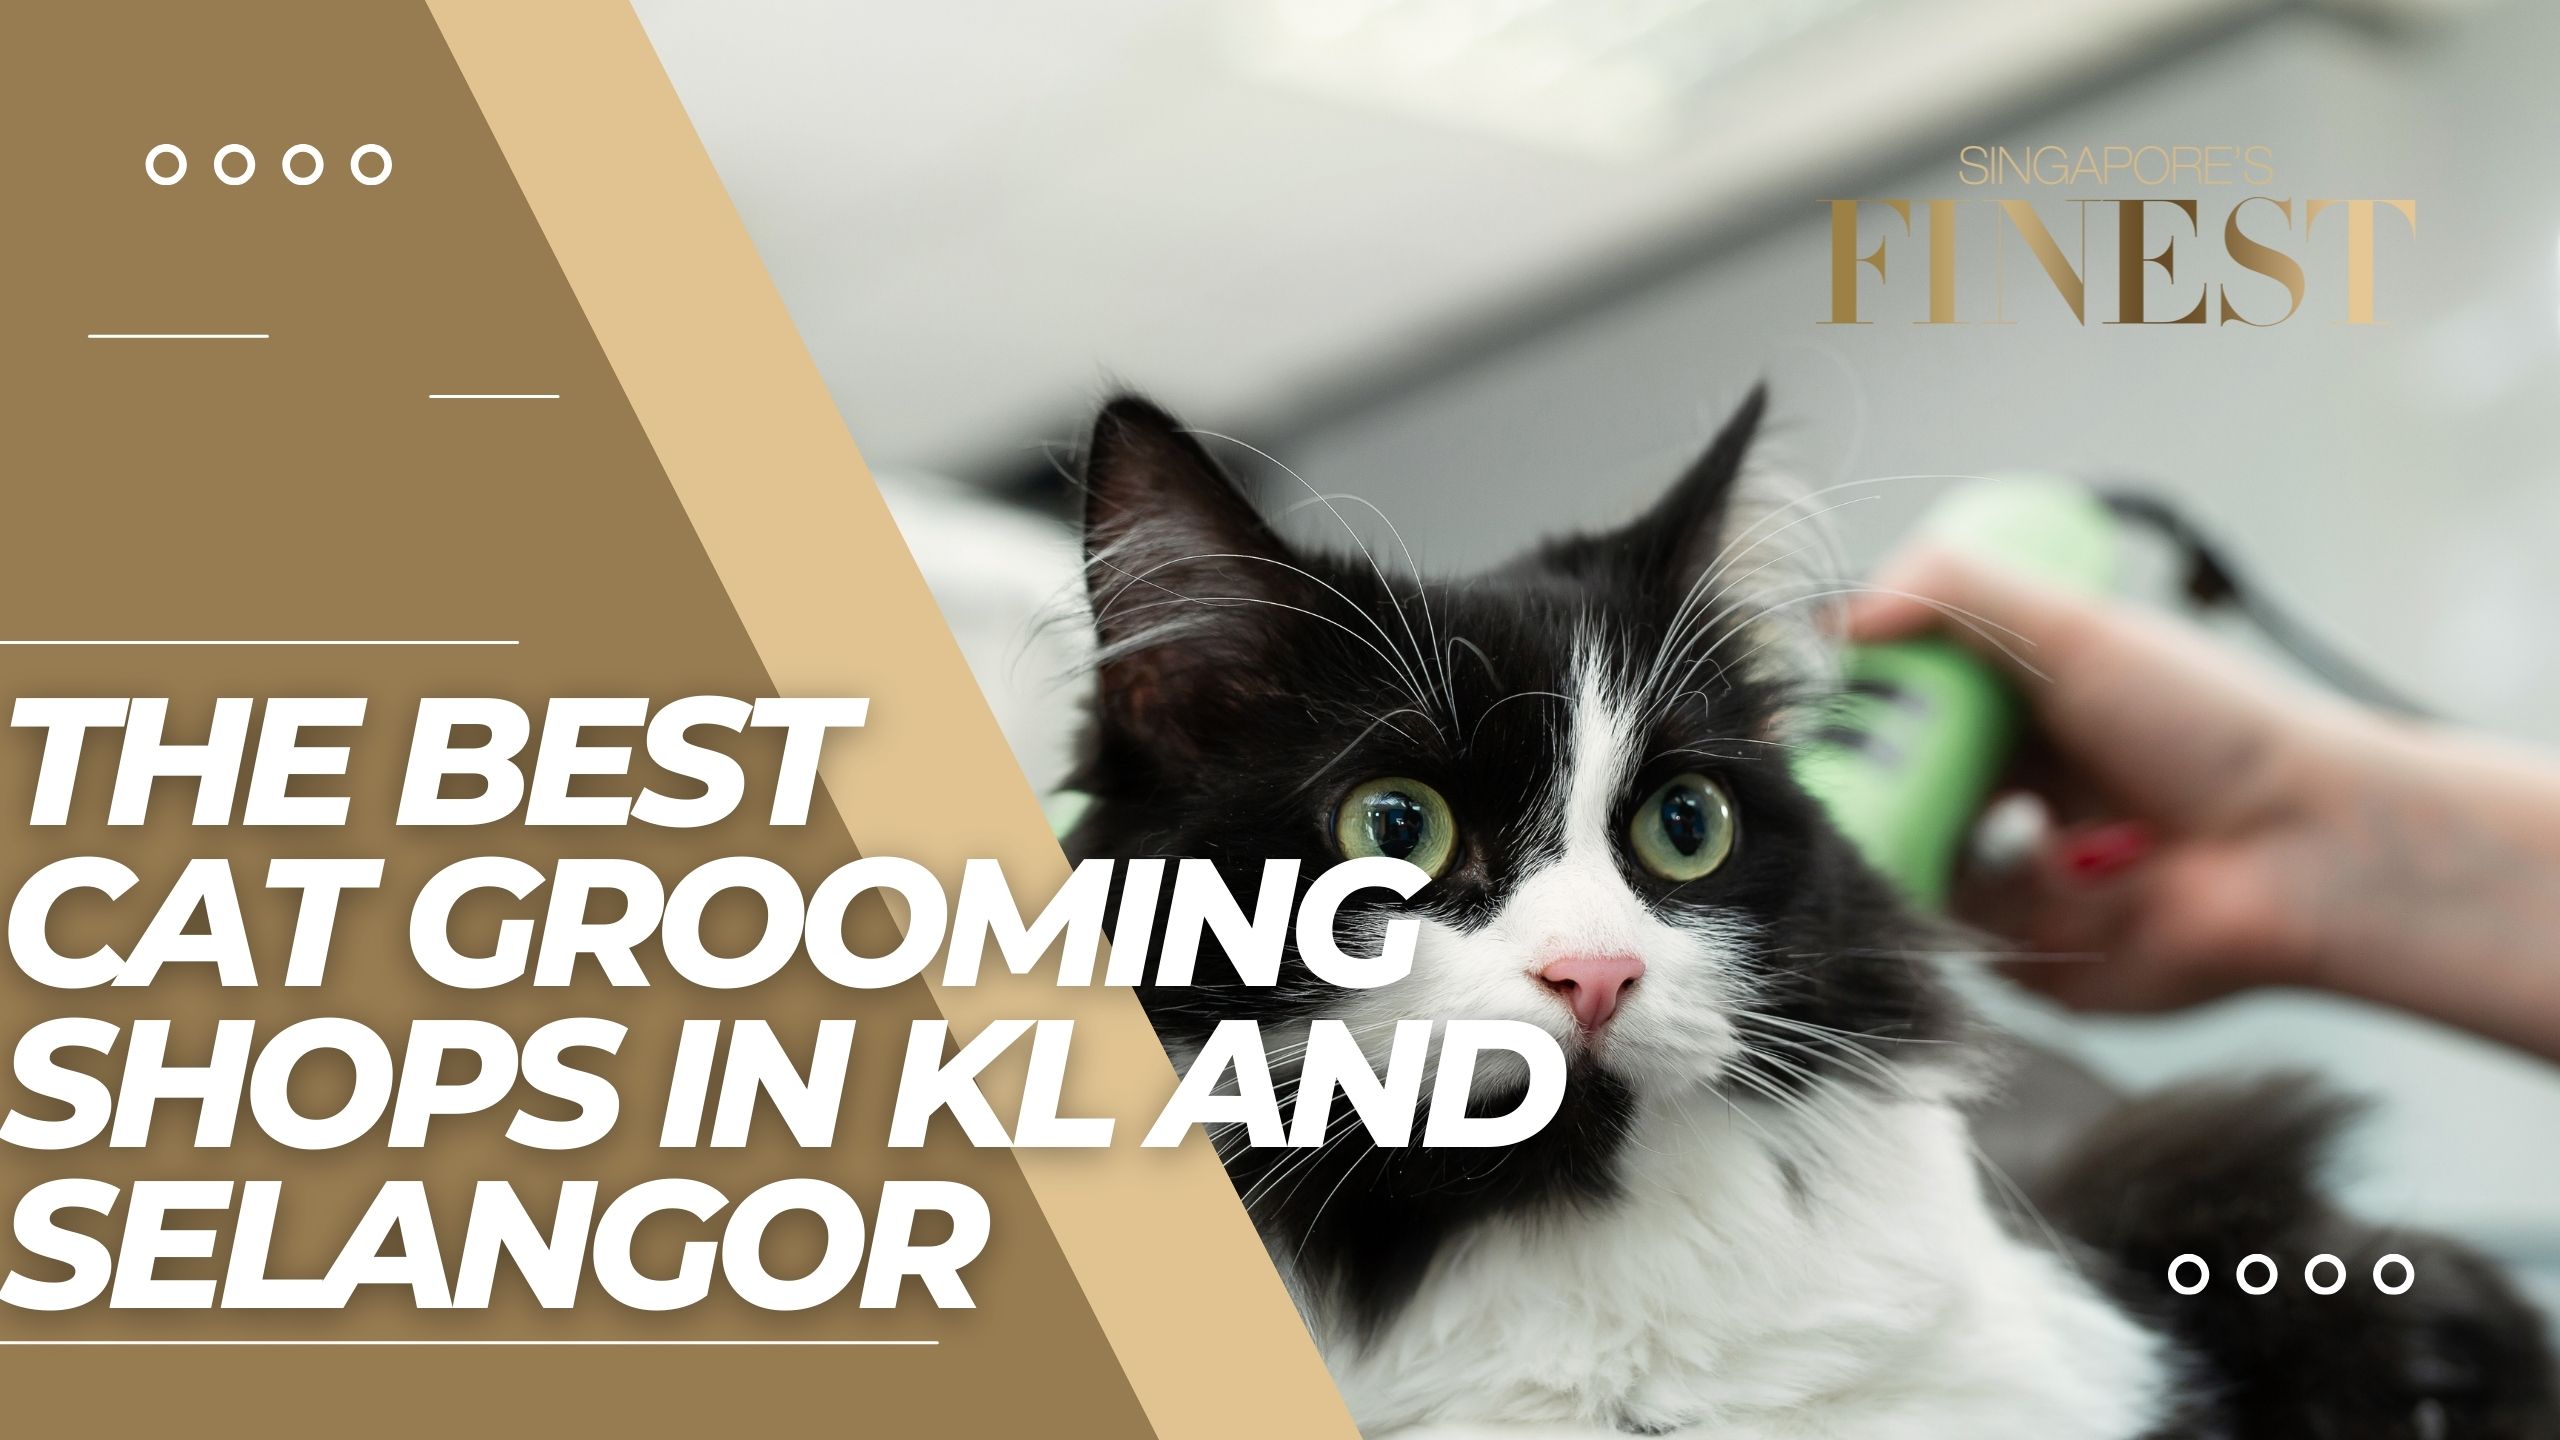 The Finest Cat Grooming Shops in KL and Selangor